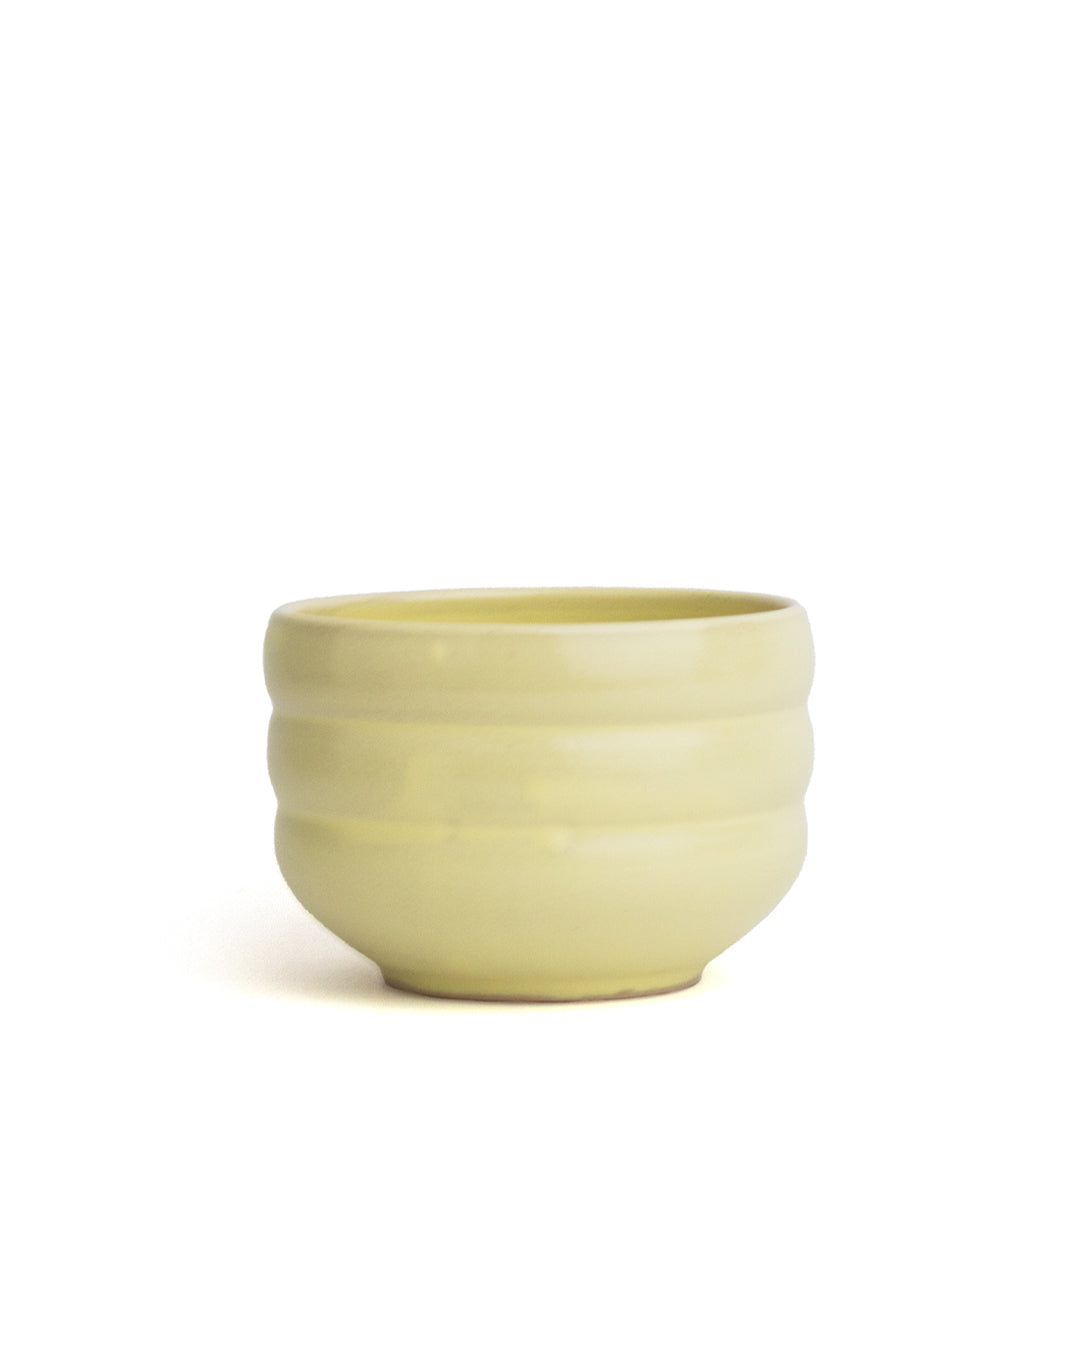 Macha cup ceramic handmade handcrafted colorful round